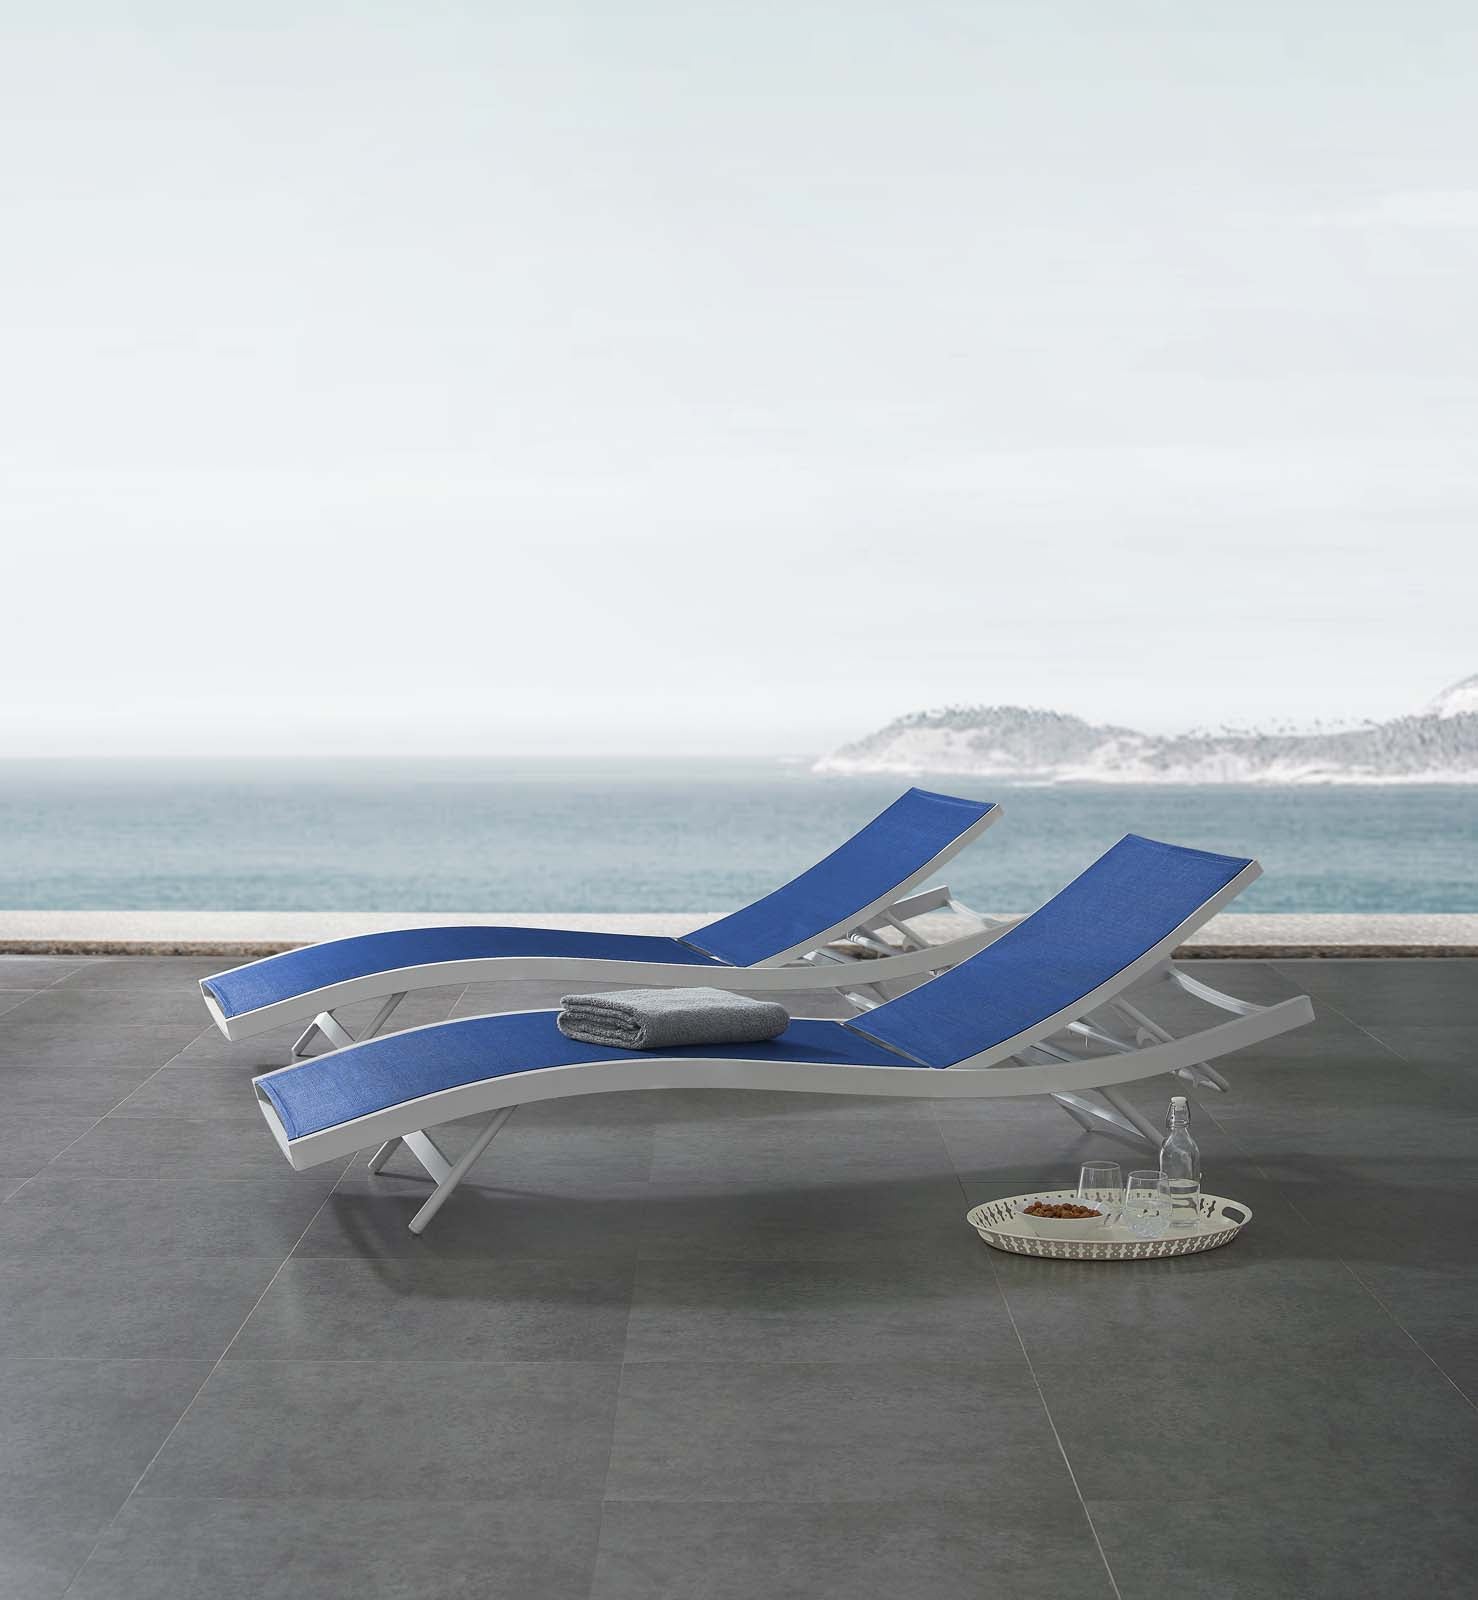 Modway Loungers - Glimpse Outdoor Patio Mesh Chaise Lounge Set of 2 White Navy